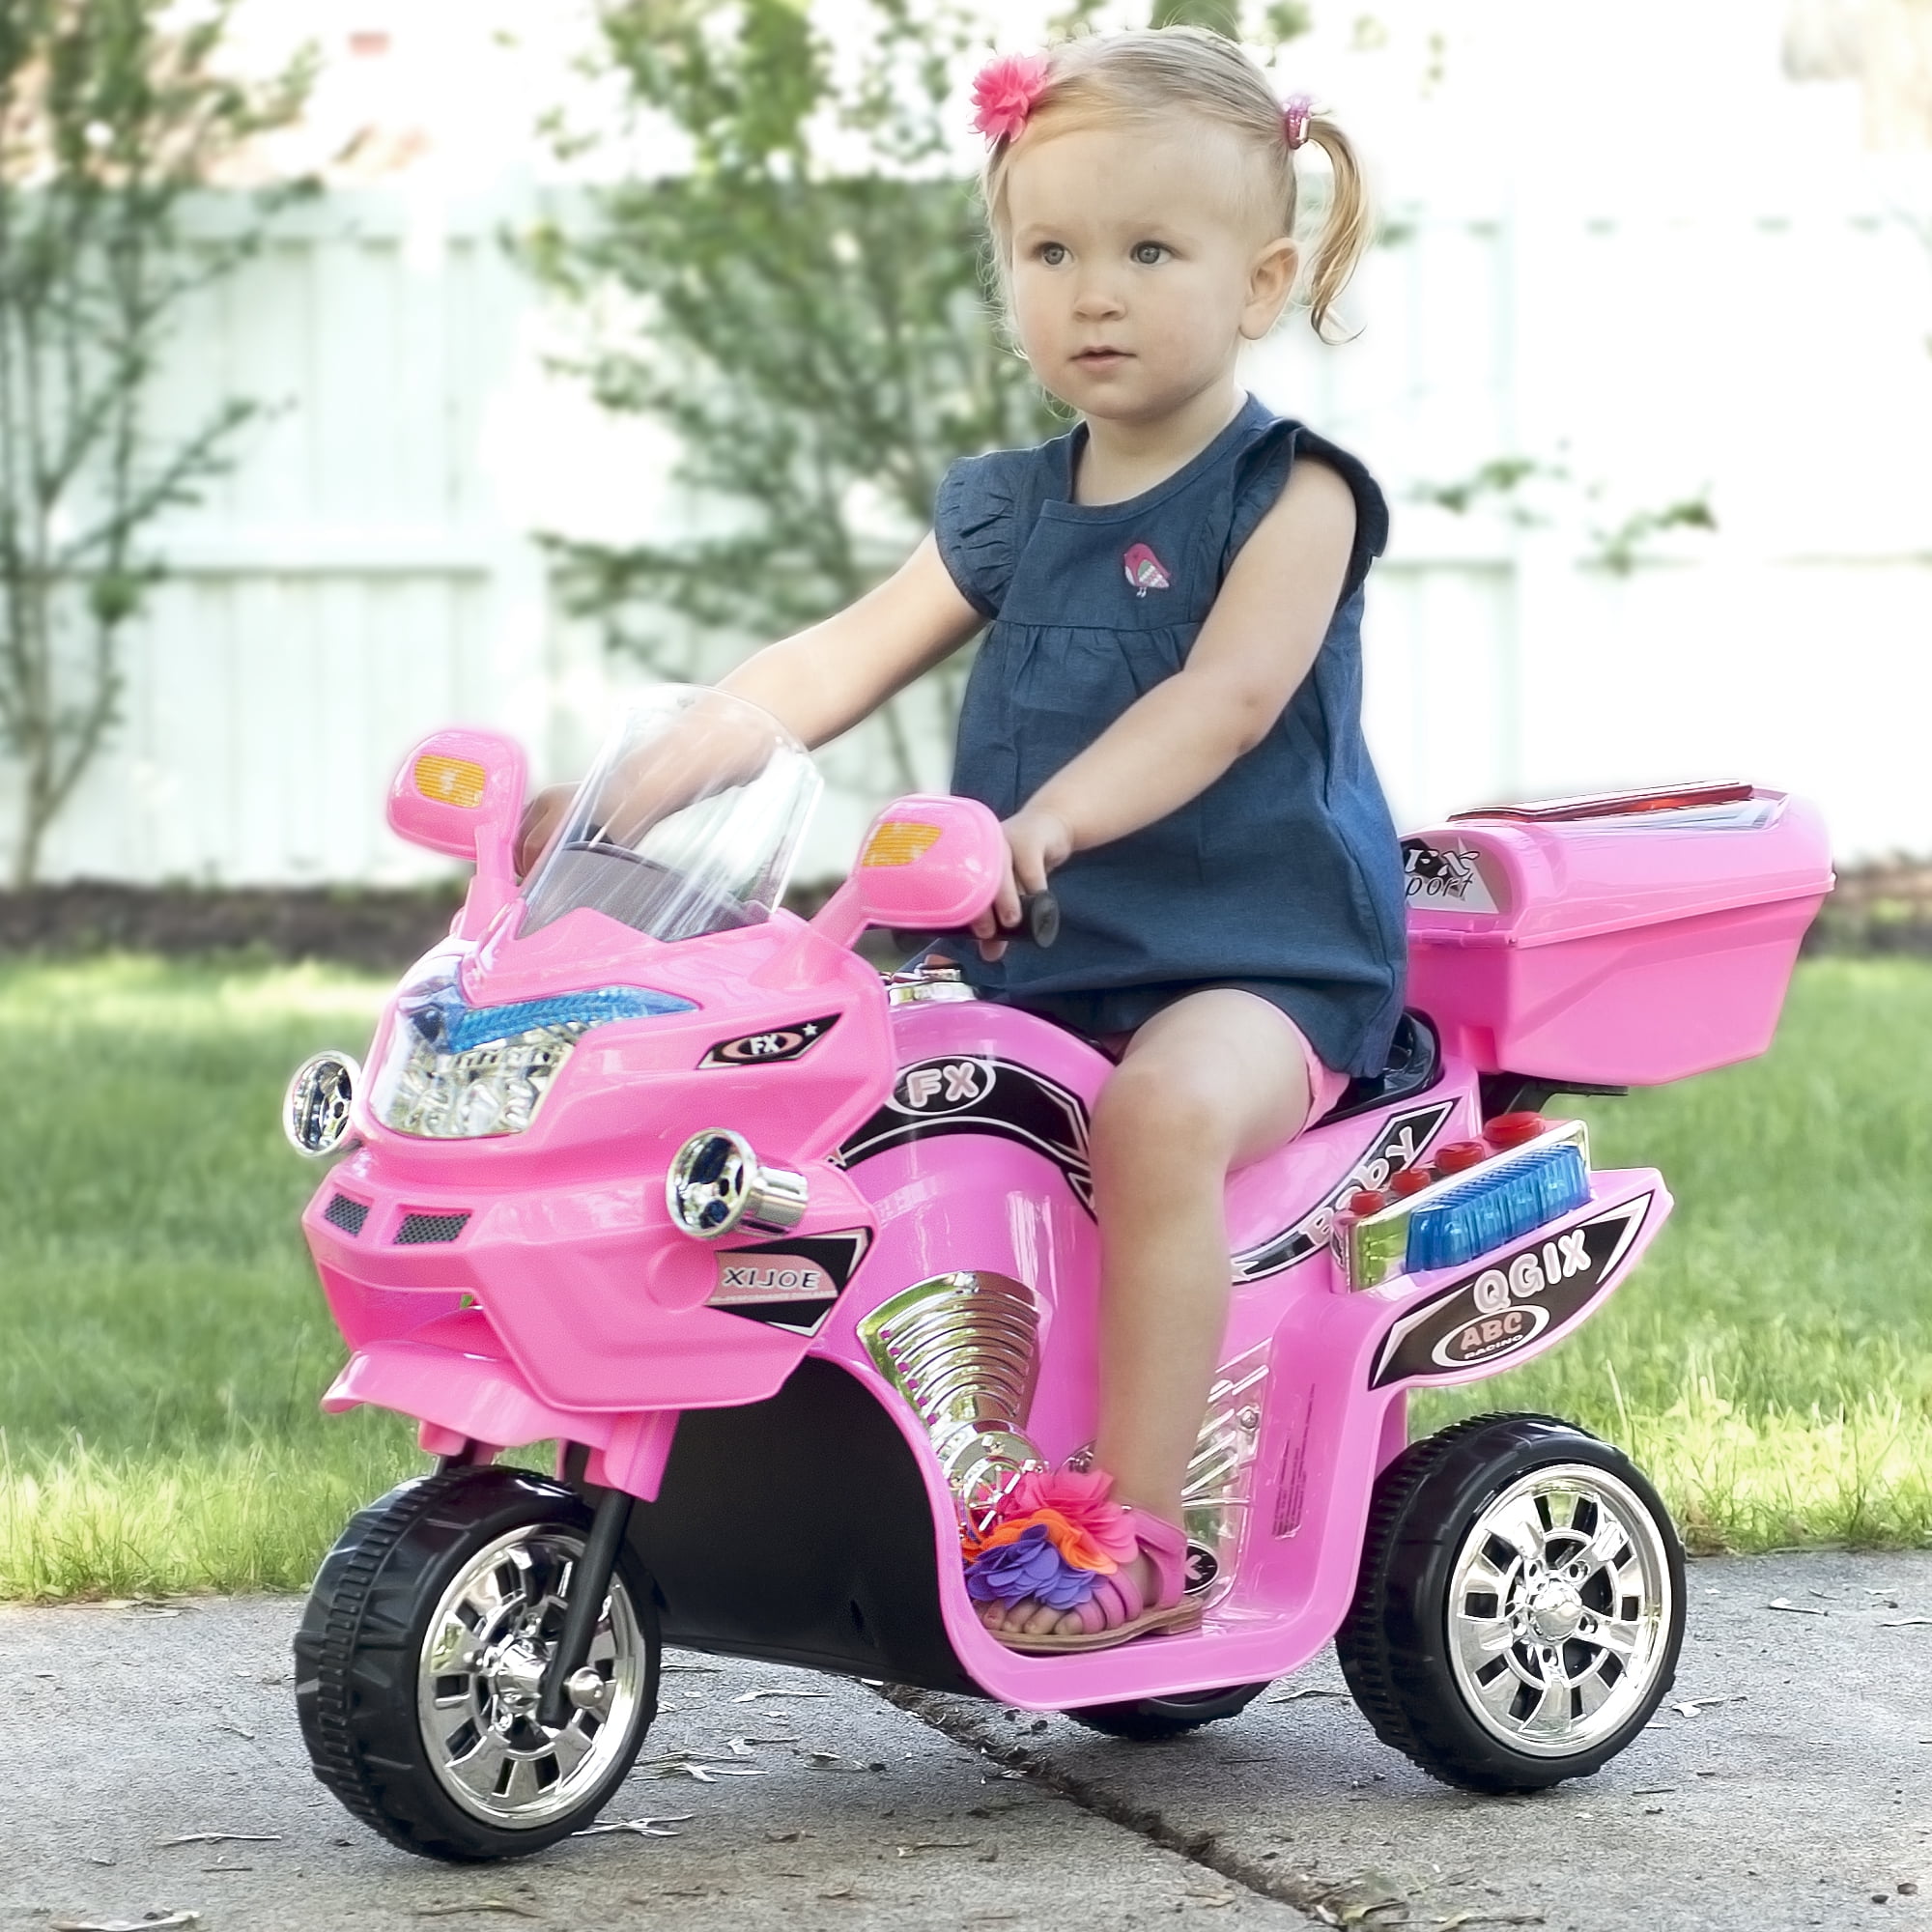 3 Wheel Motorcycle Trike 6 Volts Electric Cars For Kids Ride On Toys Riding Pink 